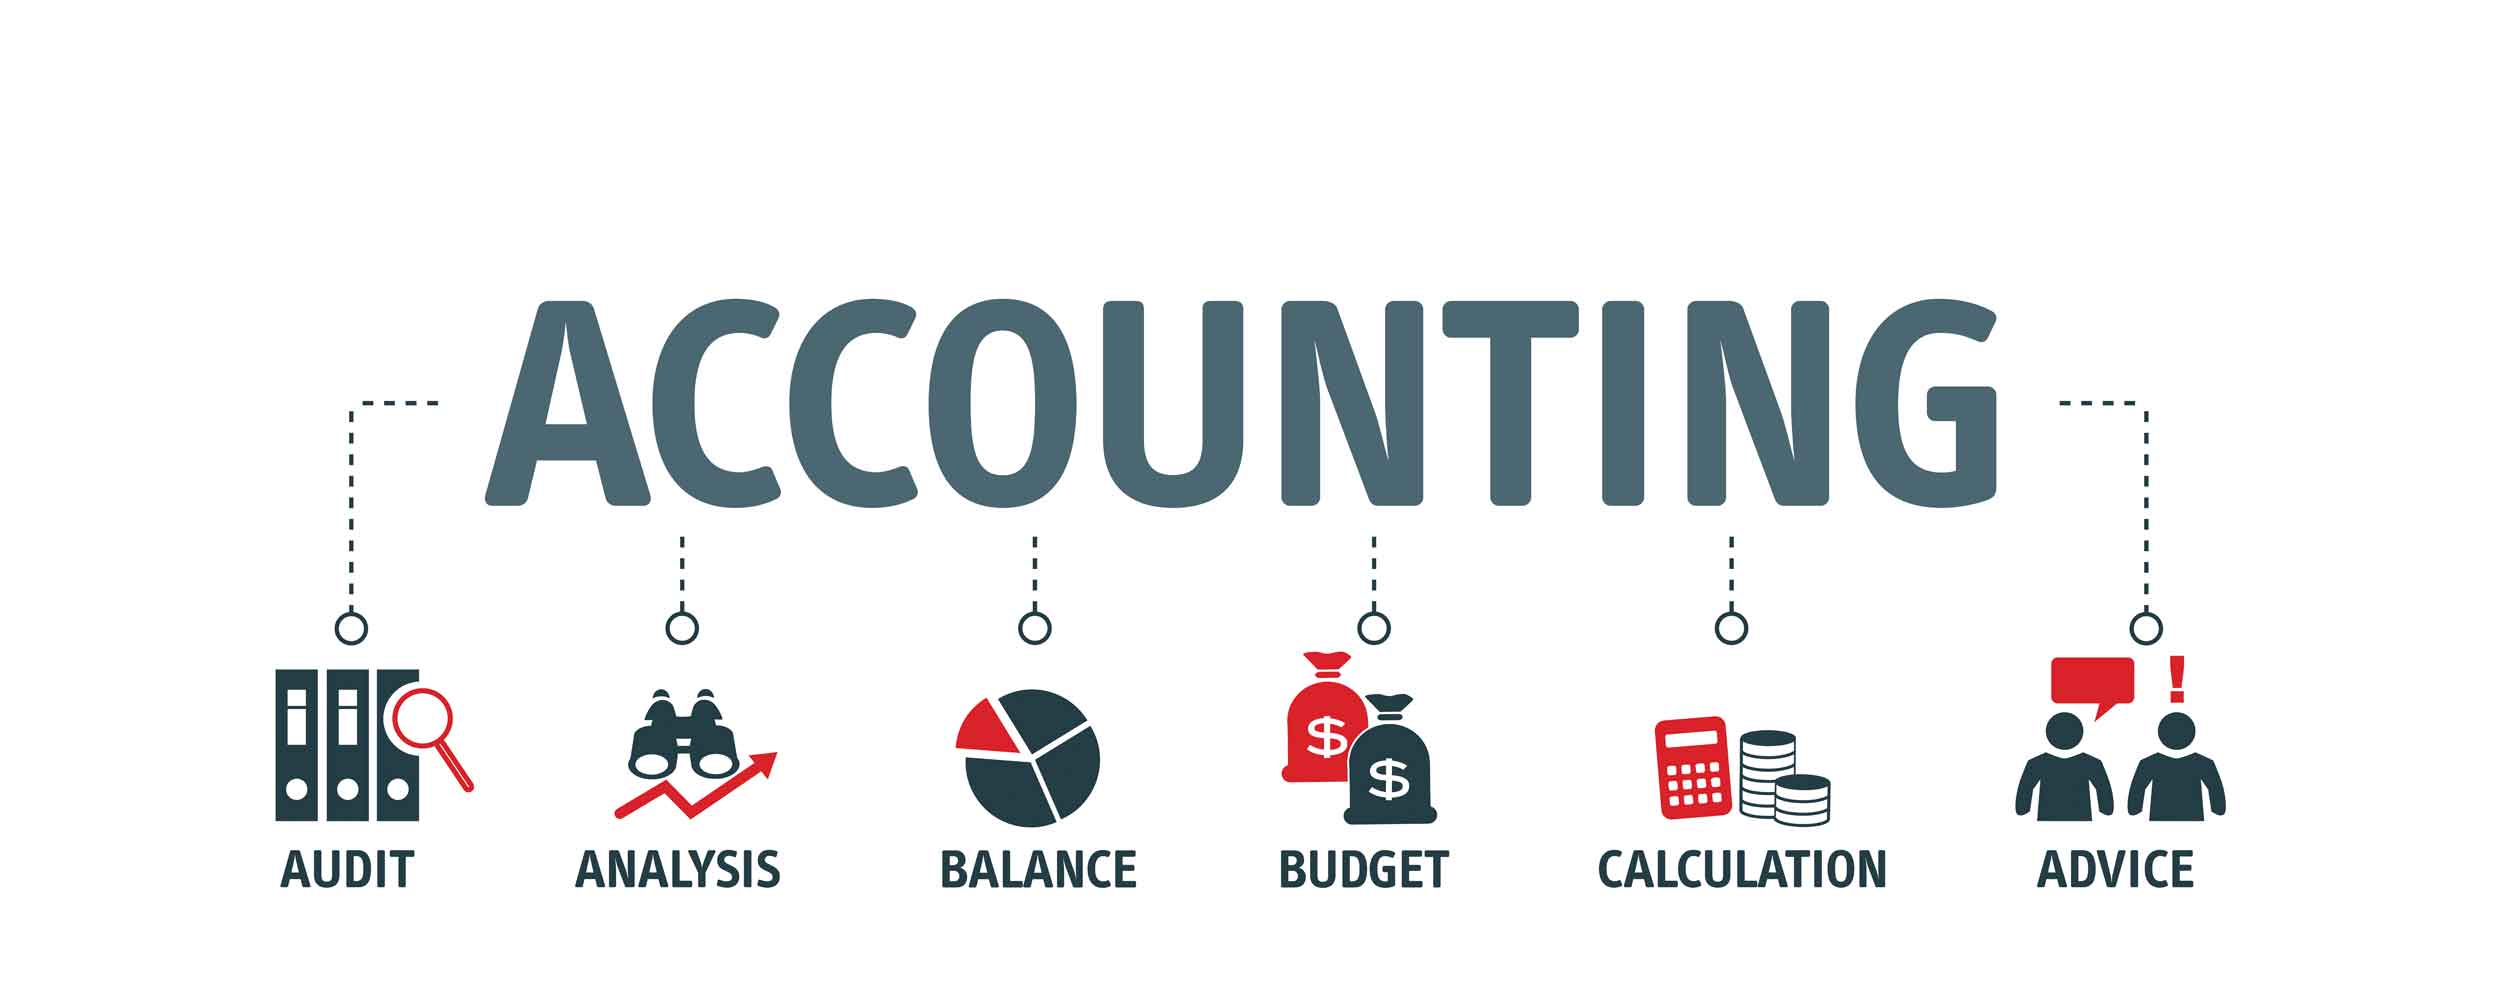 Mobile Accounting graphic with gray and red icons and the words audit, analysis, balance, budget, calculation and advice